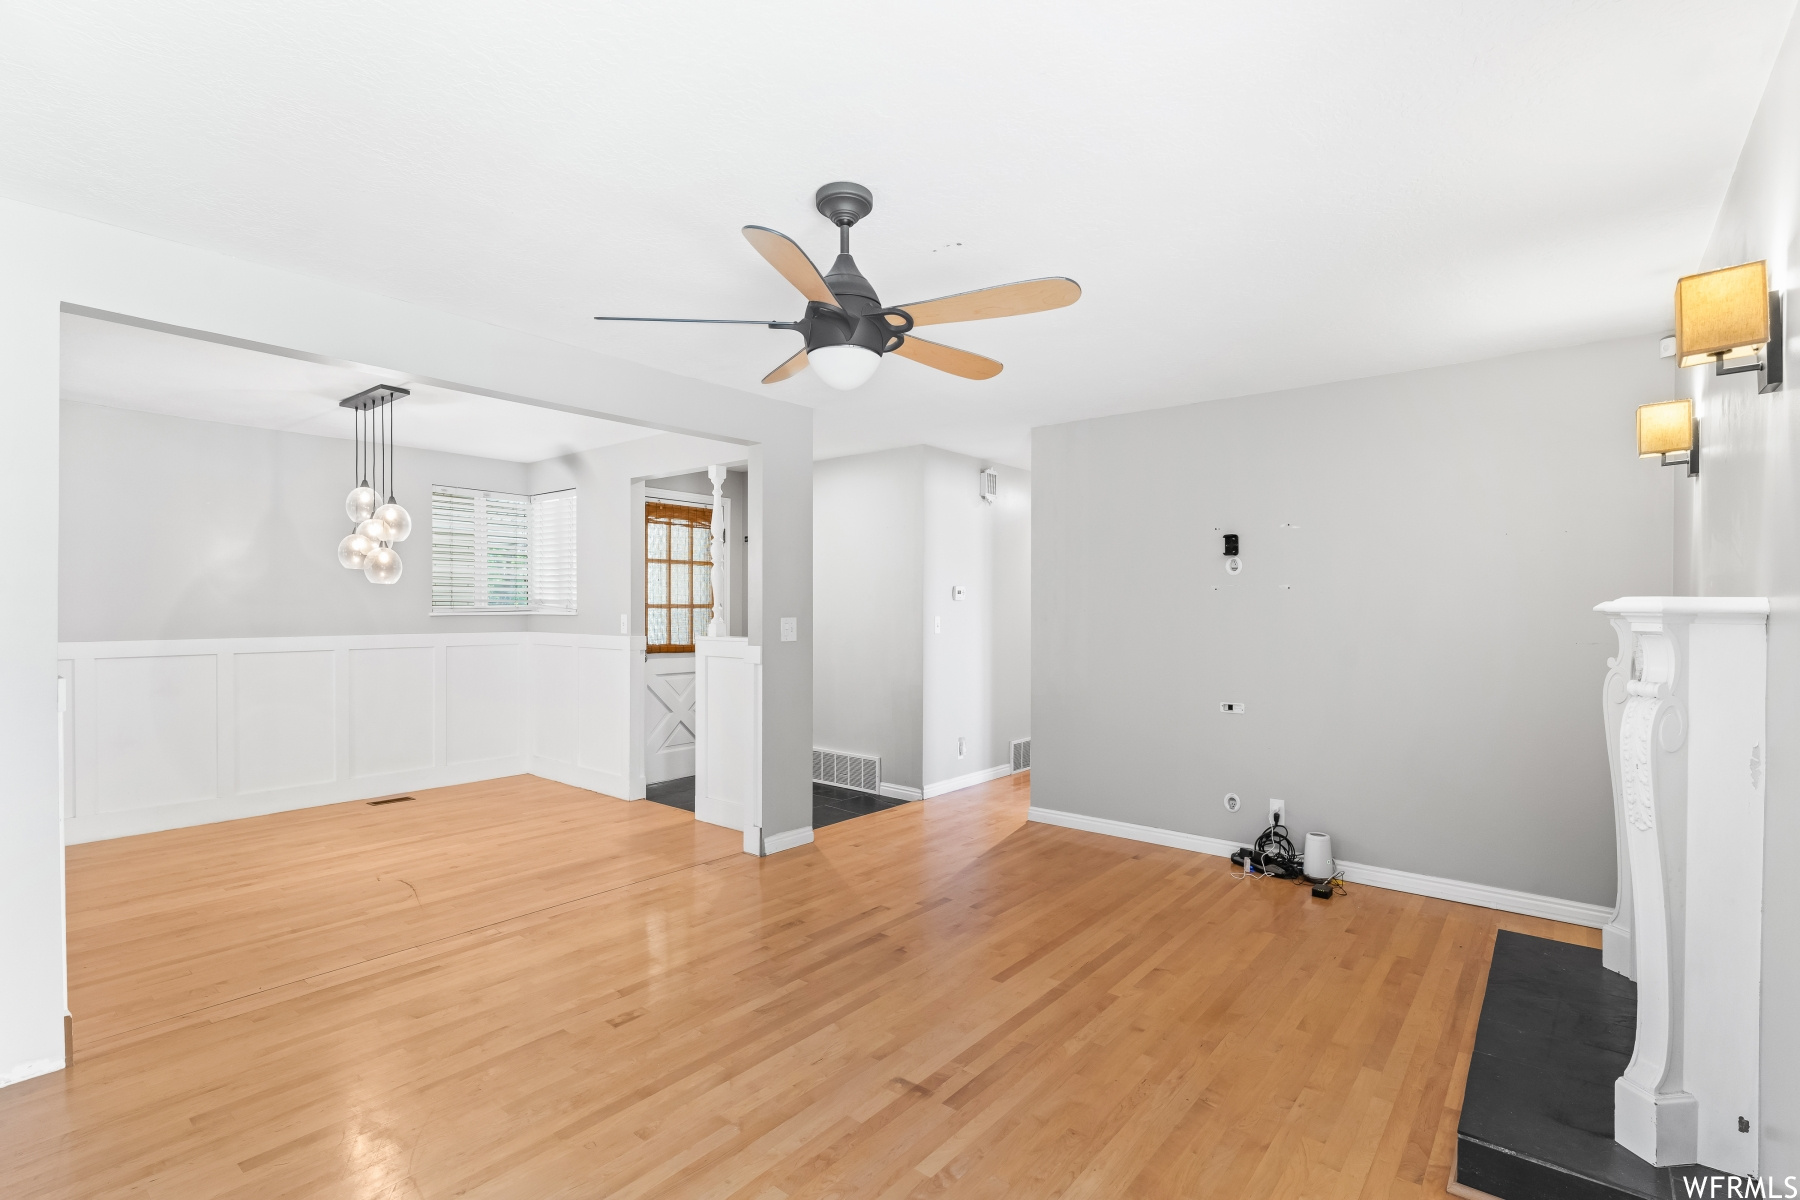 Hardwood flooring in living room featuring a ceiling fan